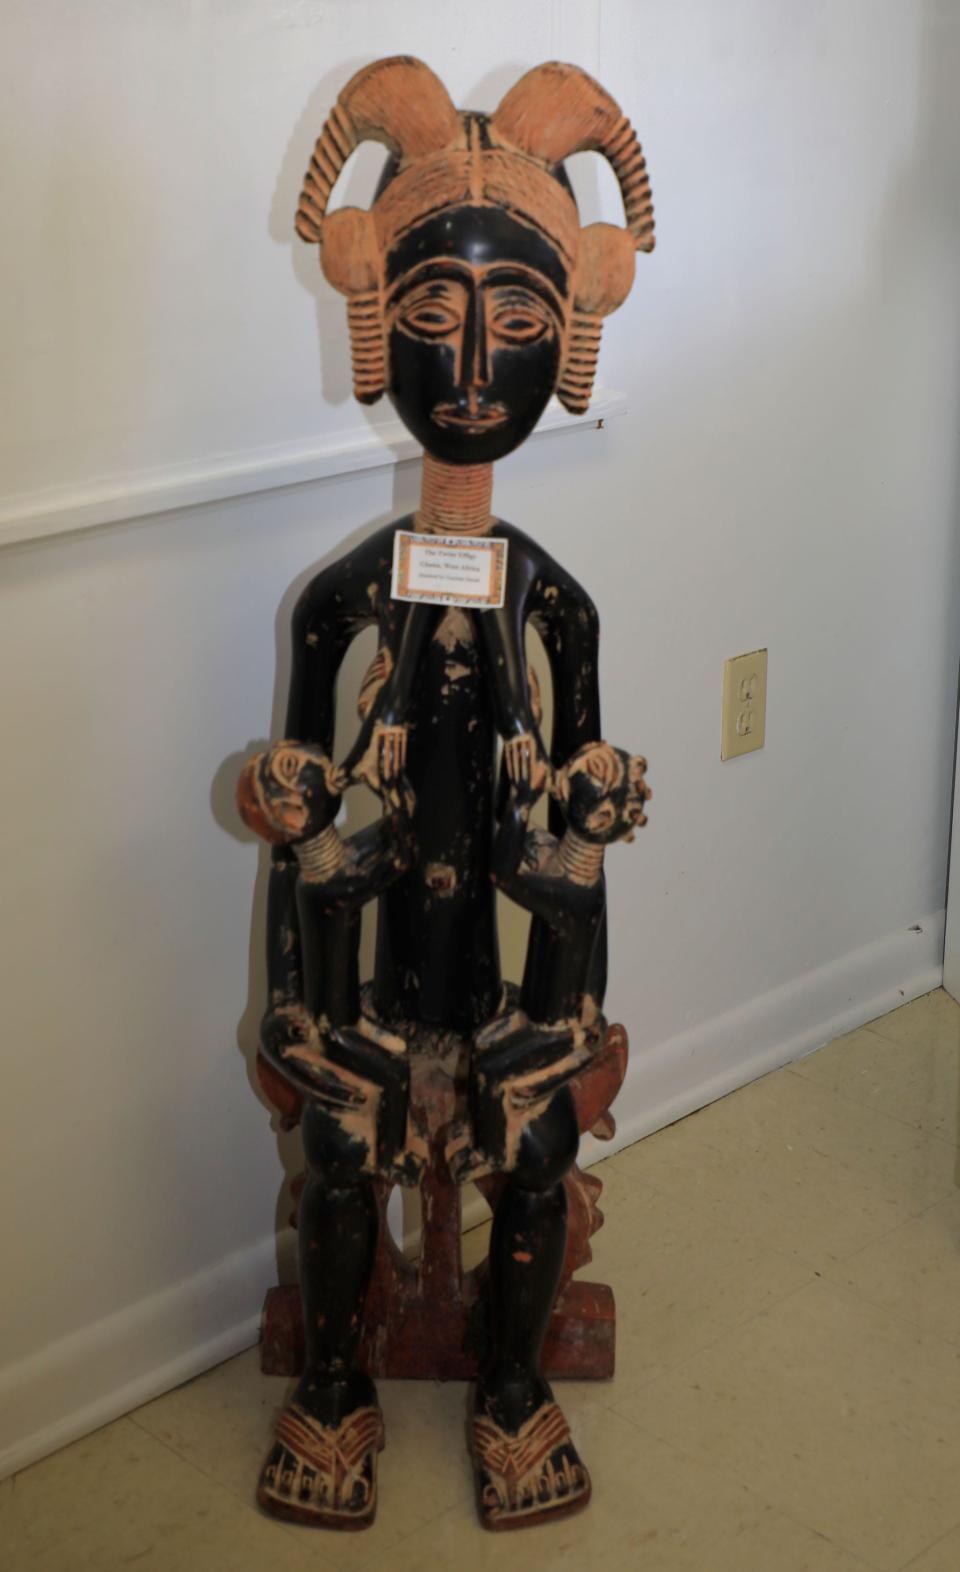 A work of art from Ghana called "The Twins Effigy" stands in the African American Museum of the Arts in DeLand.